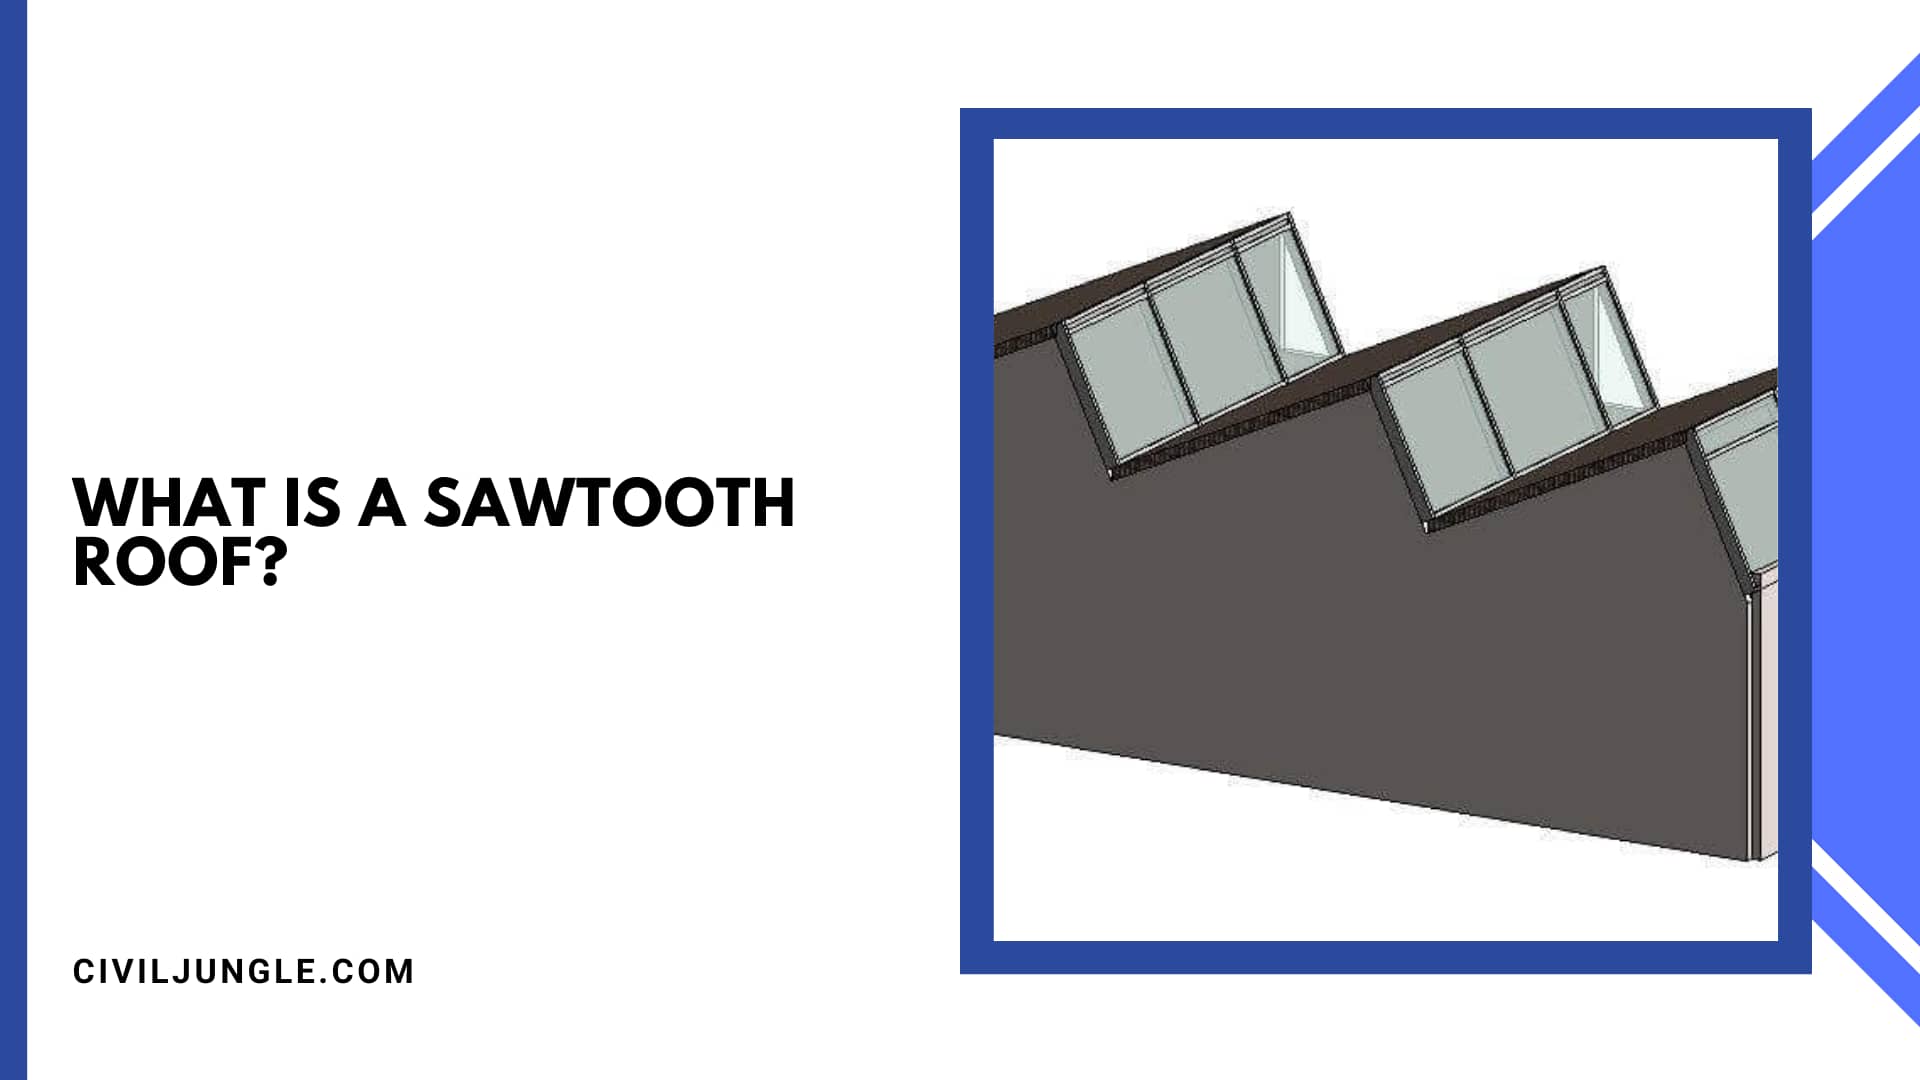 What Is a Sawtooth Roof?